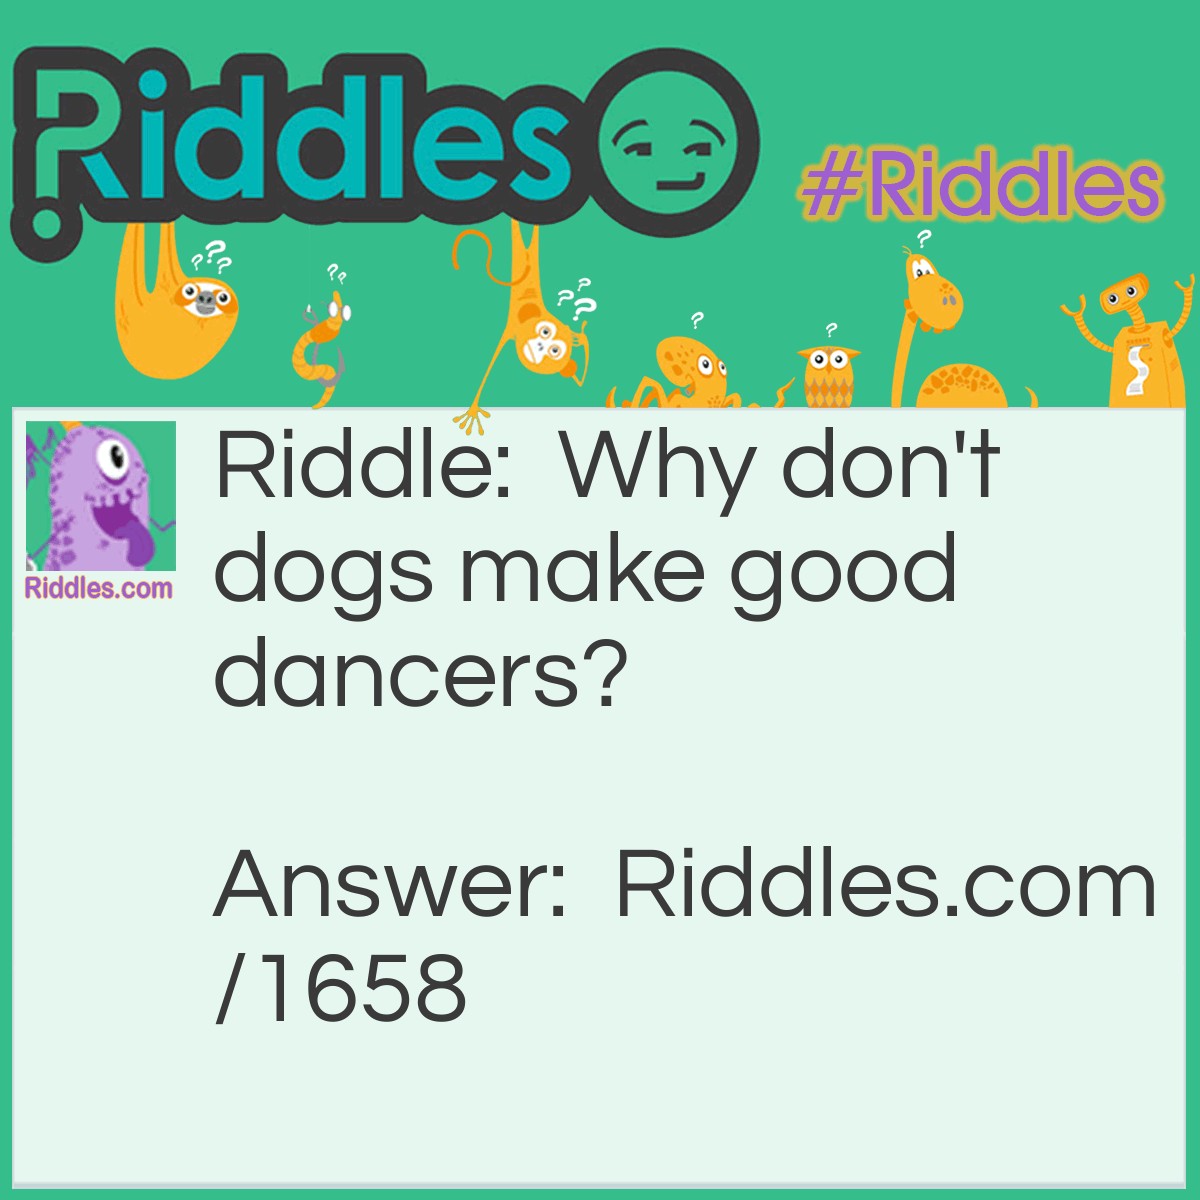 Riddle: Why don't dogs make good dancers? Answer: Because they have two left feet.